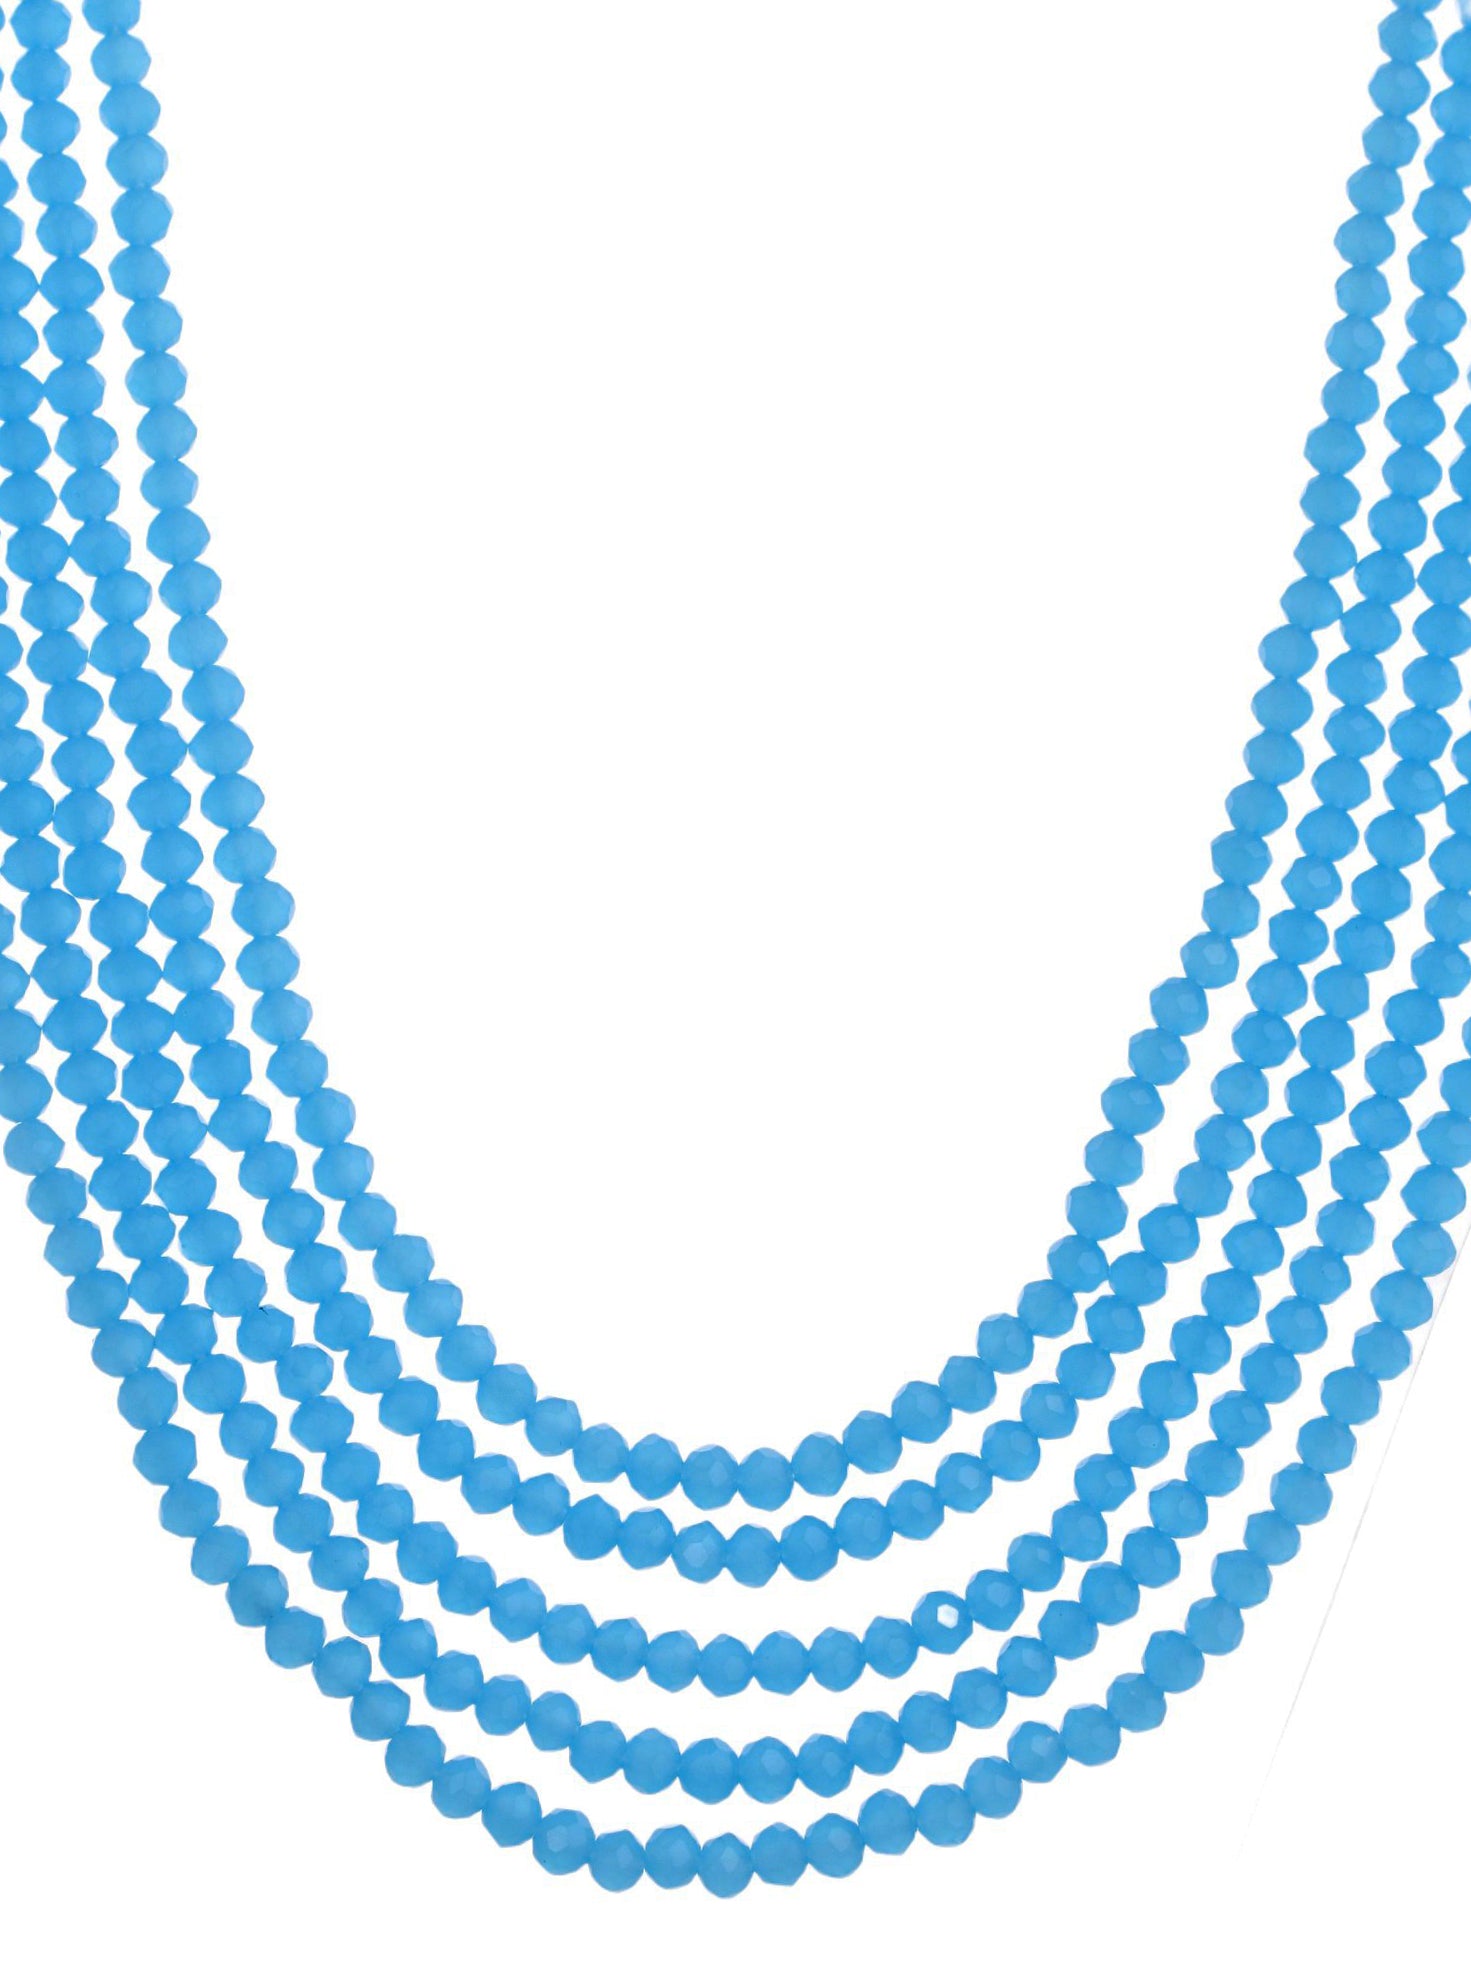 Long Blue layered Necklace